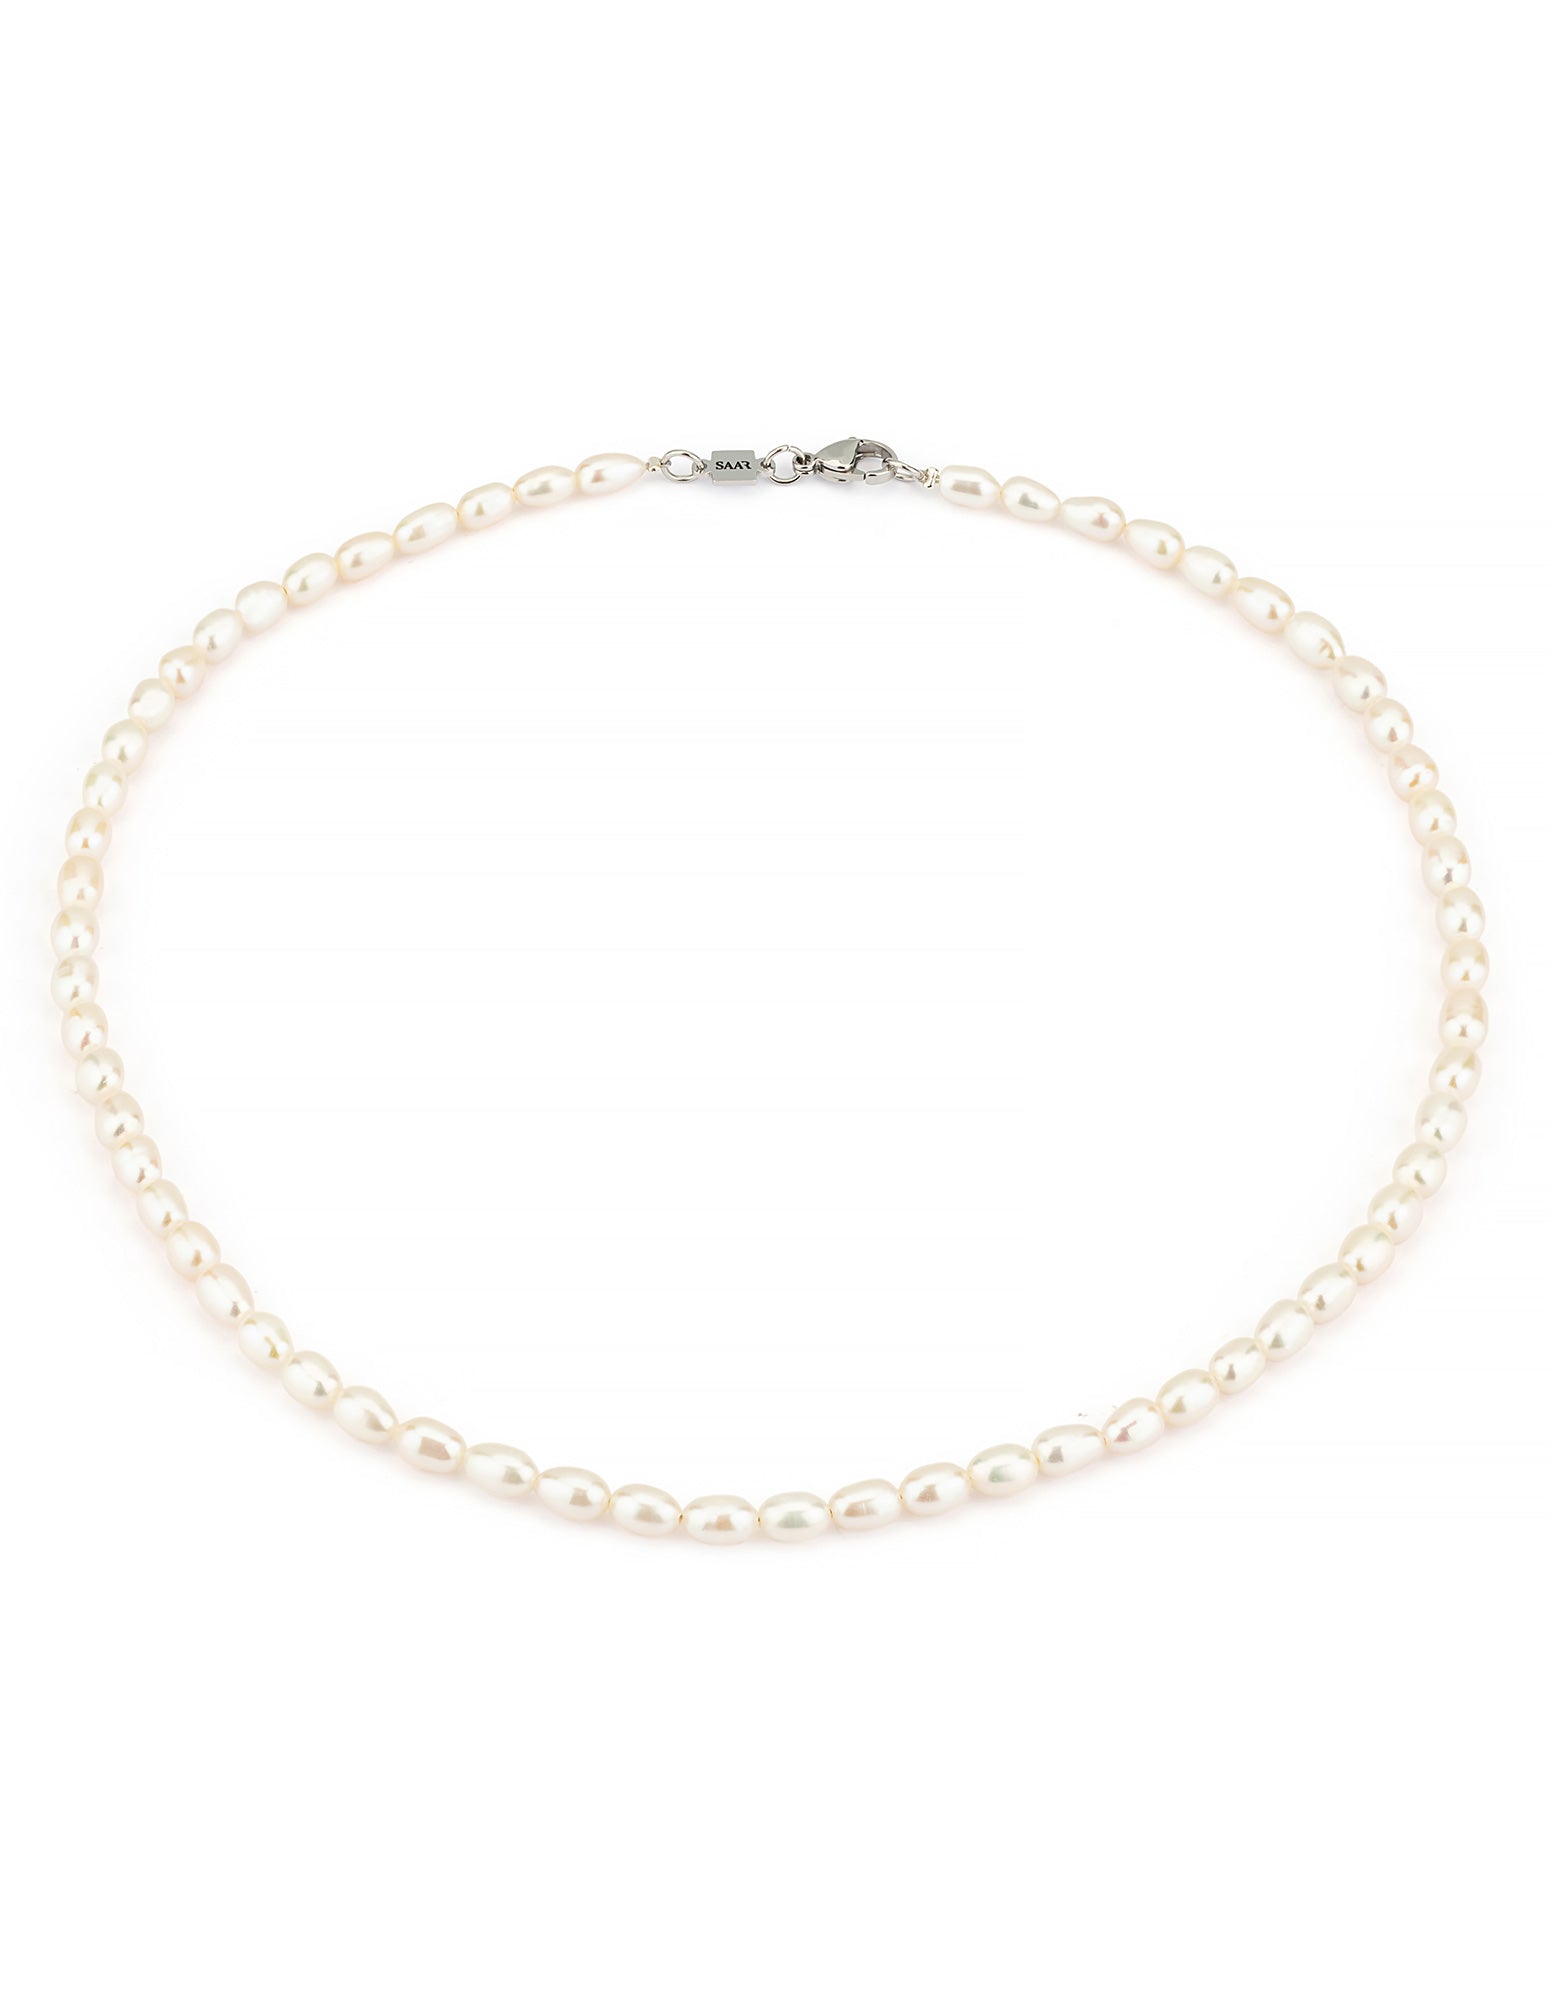 5mm Rice Pearl Necklace 